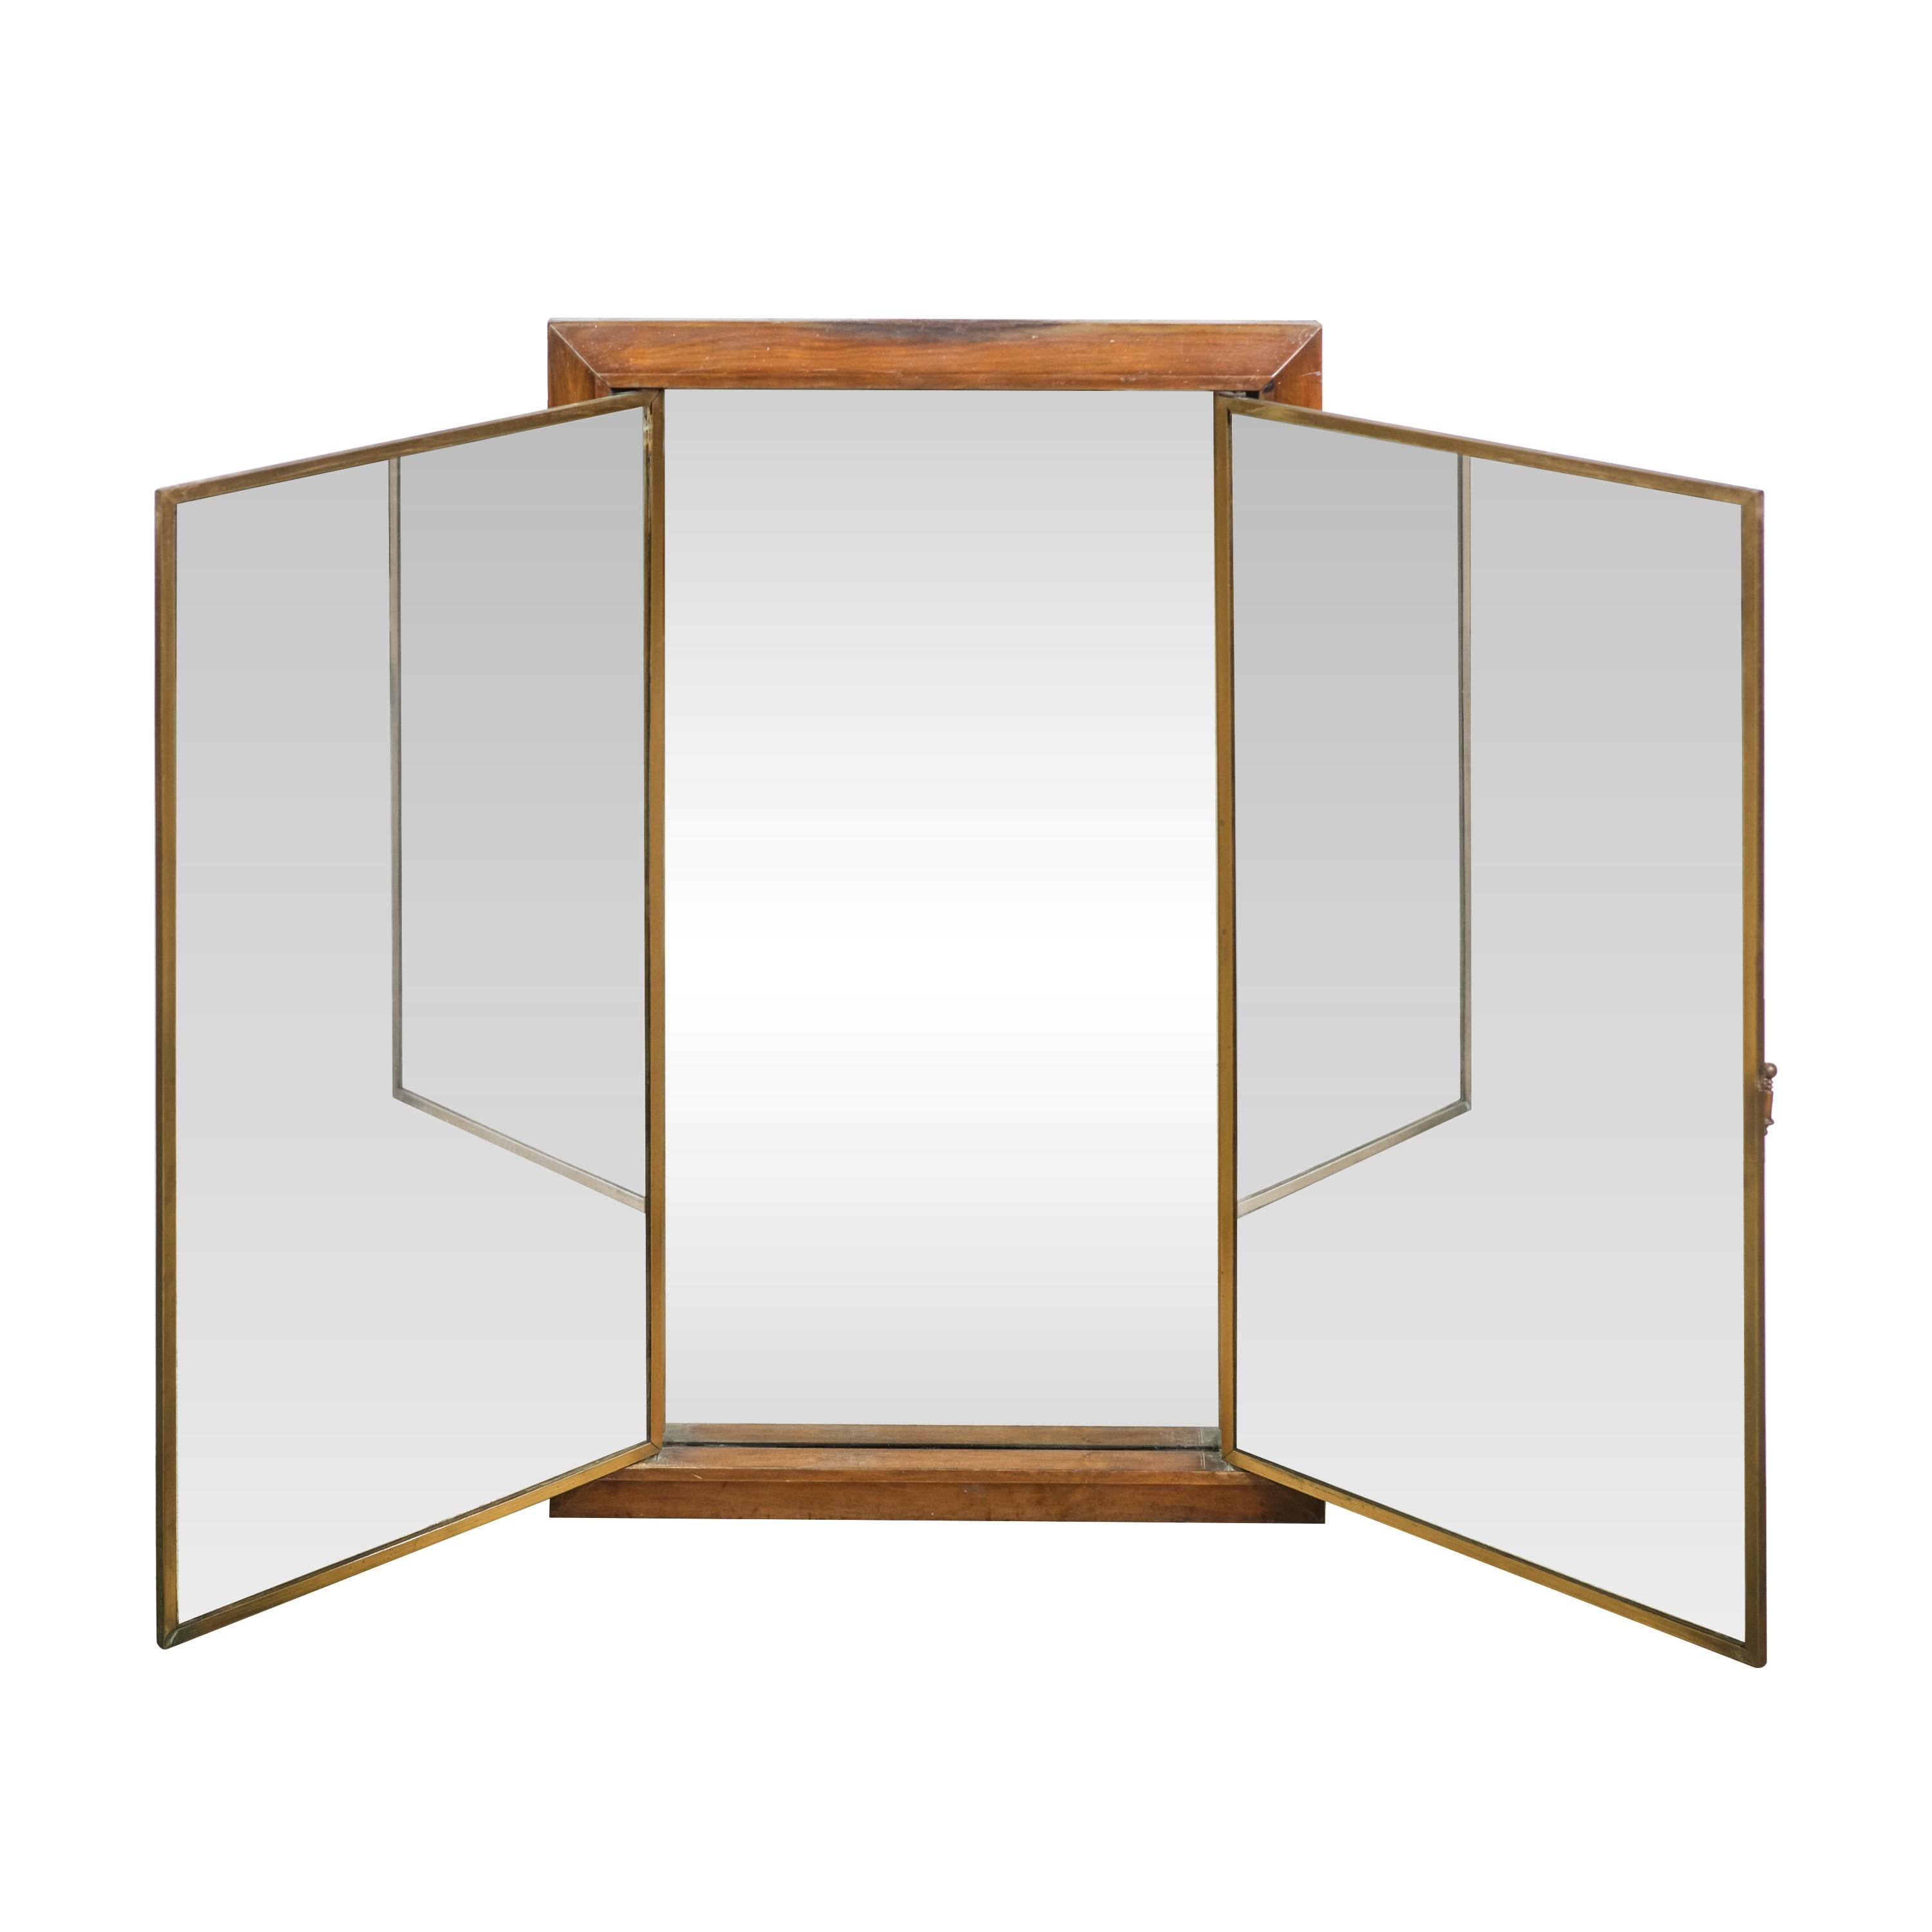 20th century three way three foot tall folding mirror. The wood frame has not been refinished and has the original patina. Original distressed beveled mirrors. Also features bronze details. Made by Miroir Brot Paris. Please see images. This can be